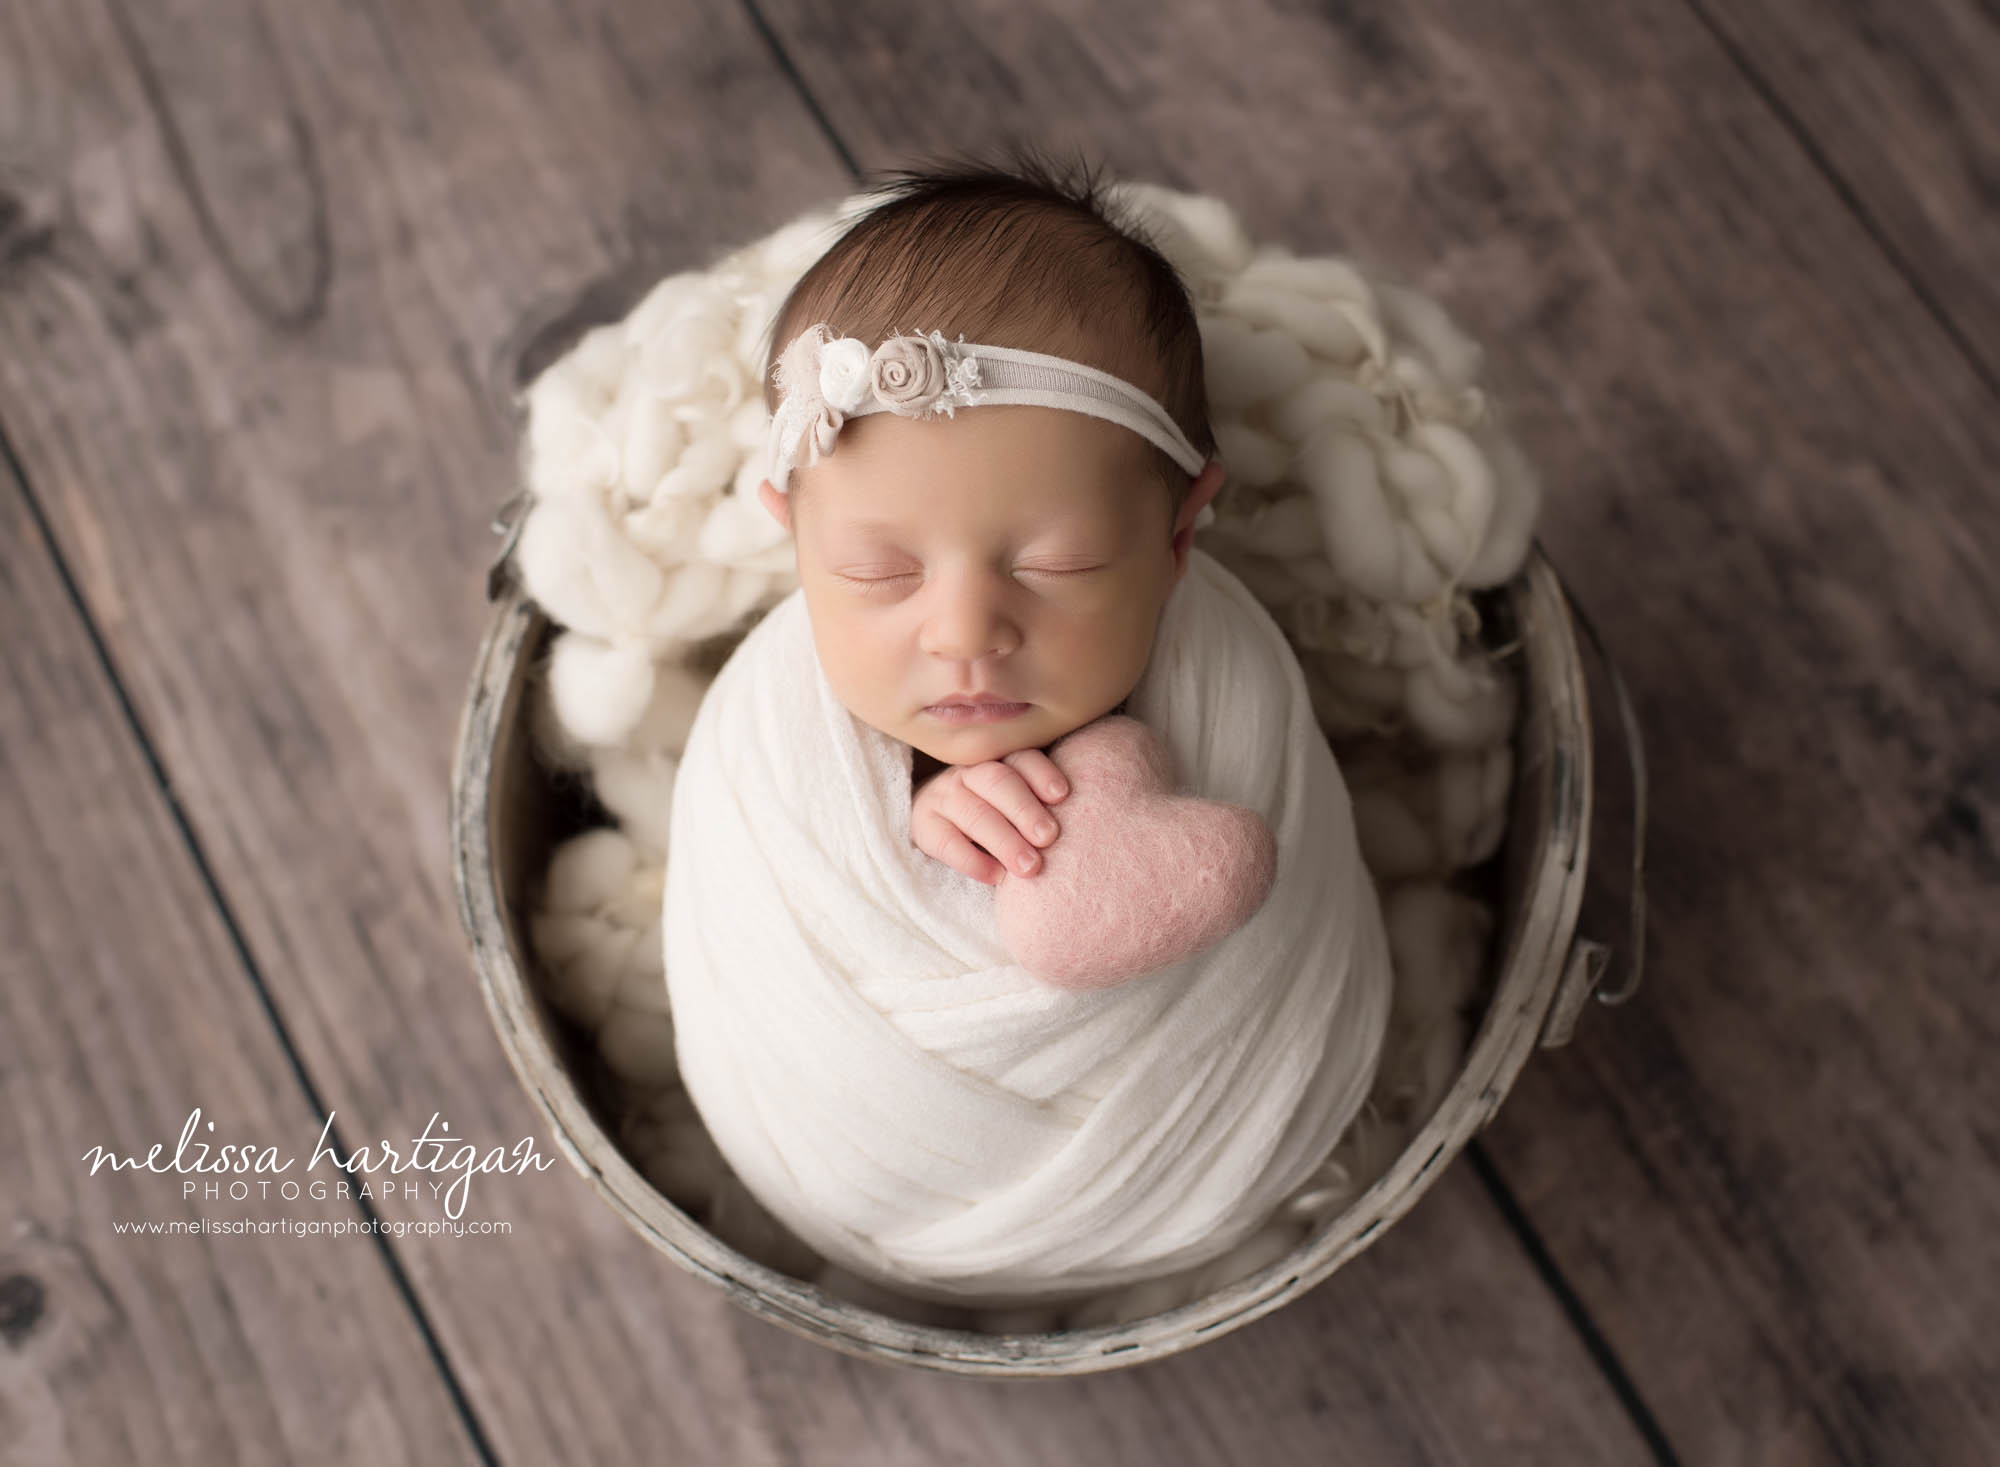 newborn baby girl posed in bucket holding pink felted heart